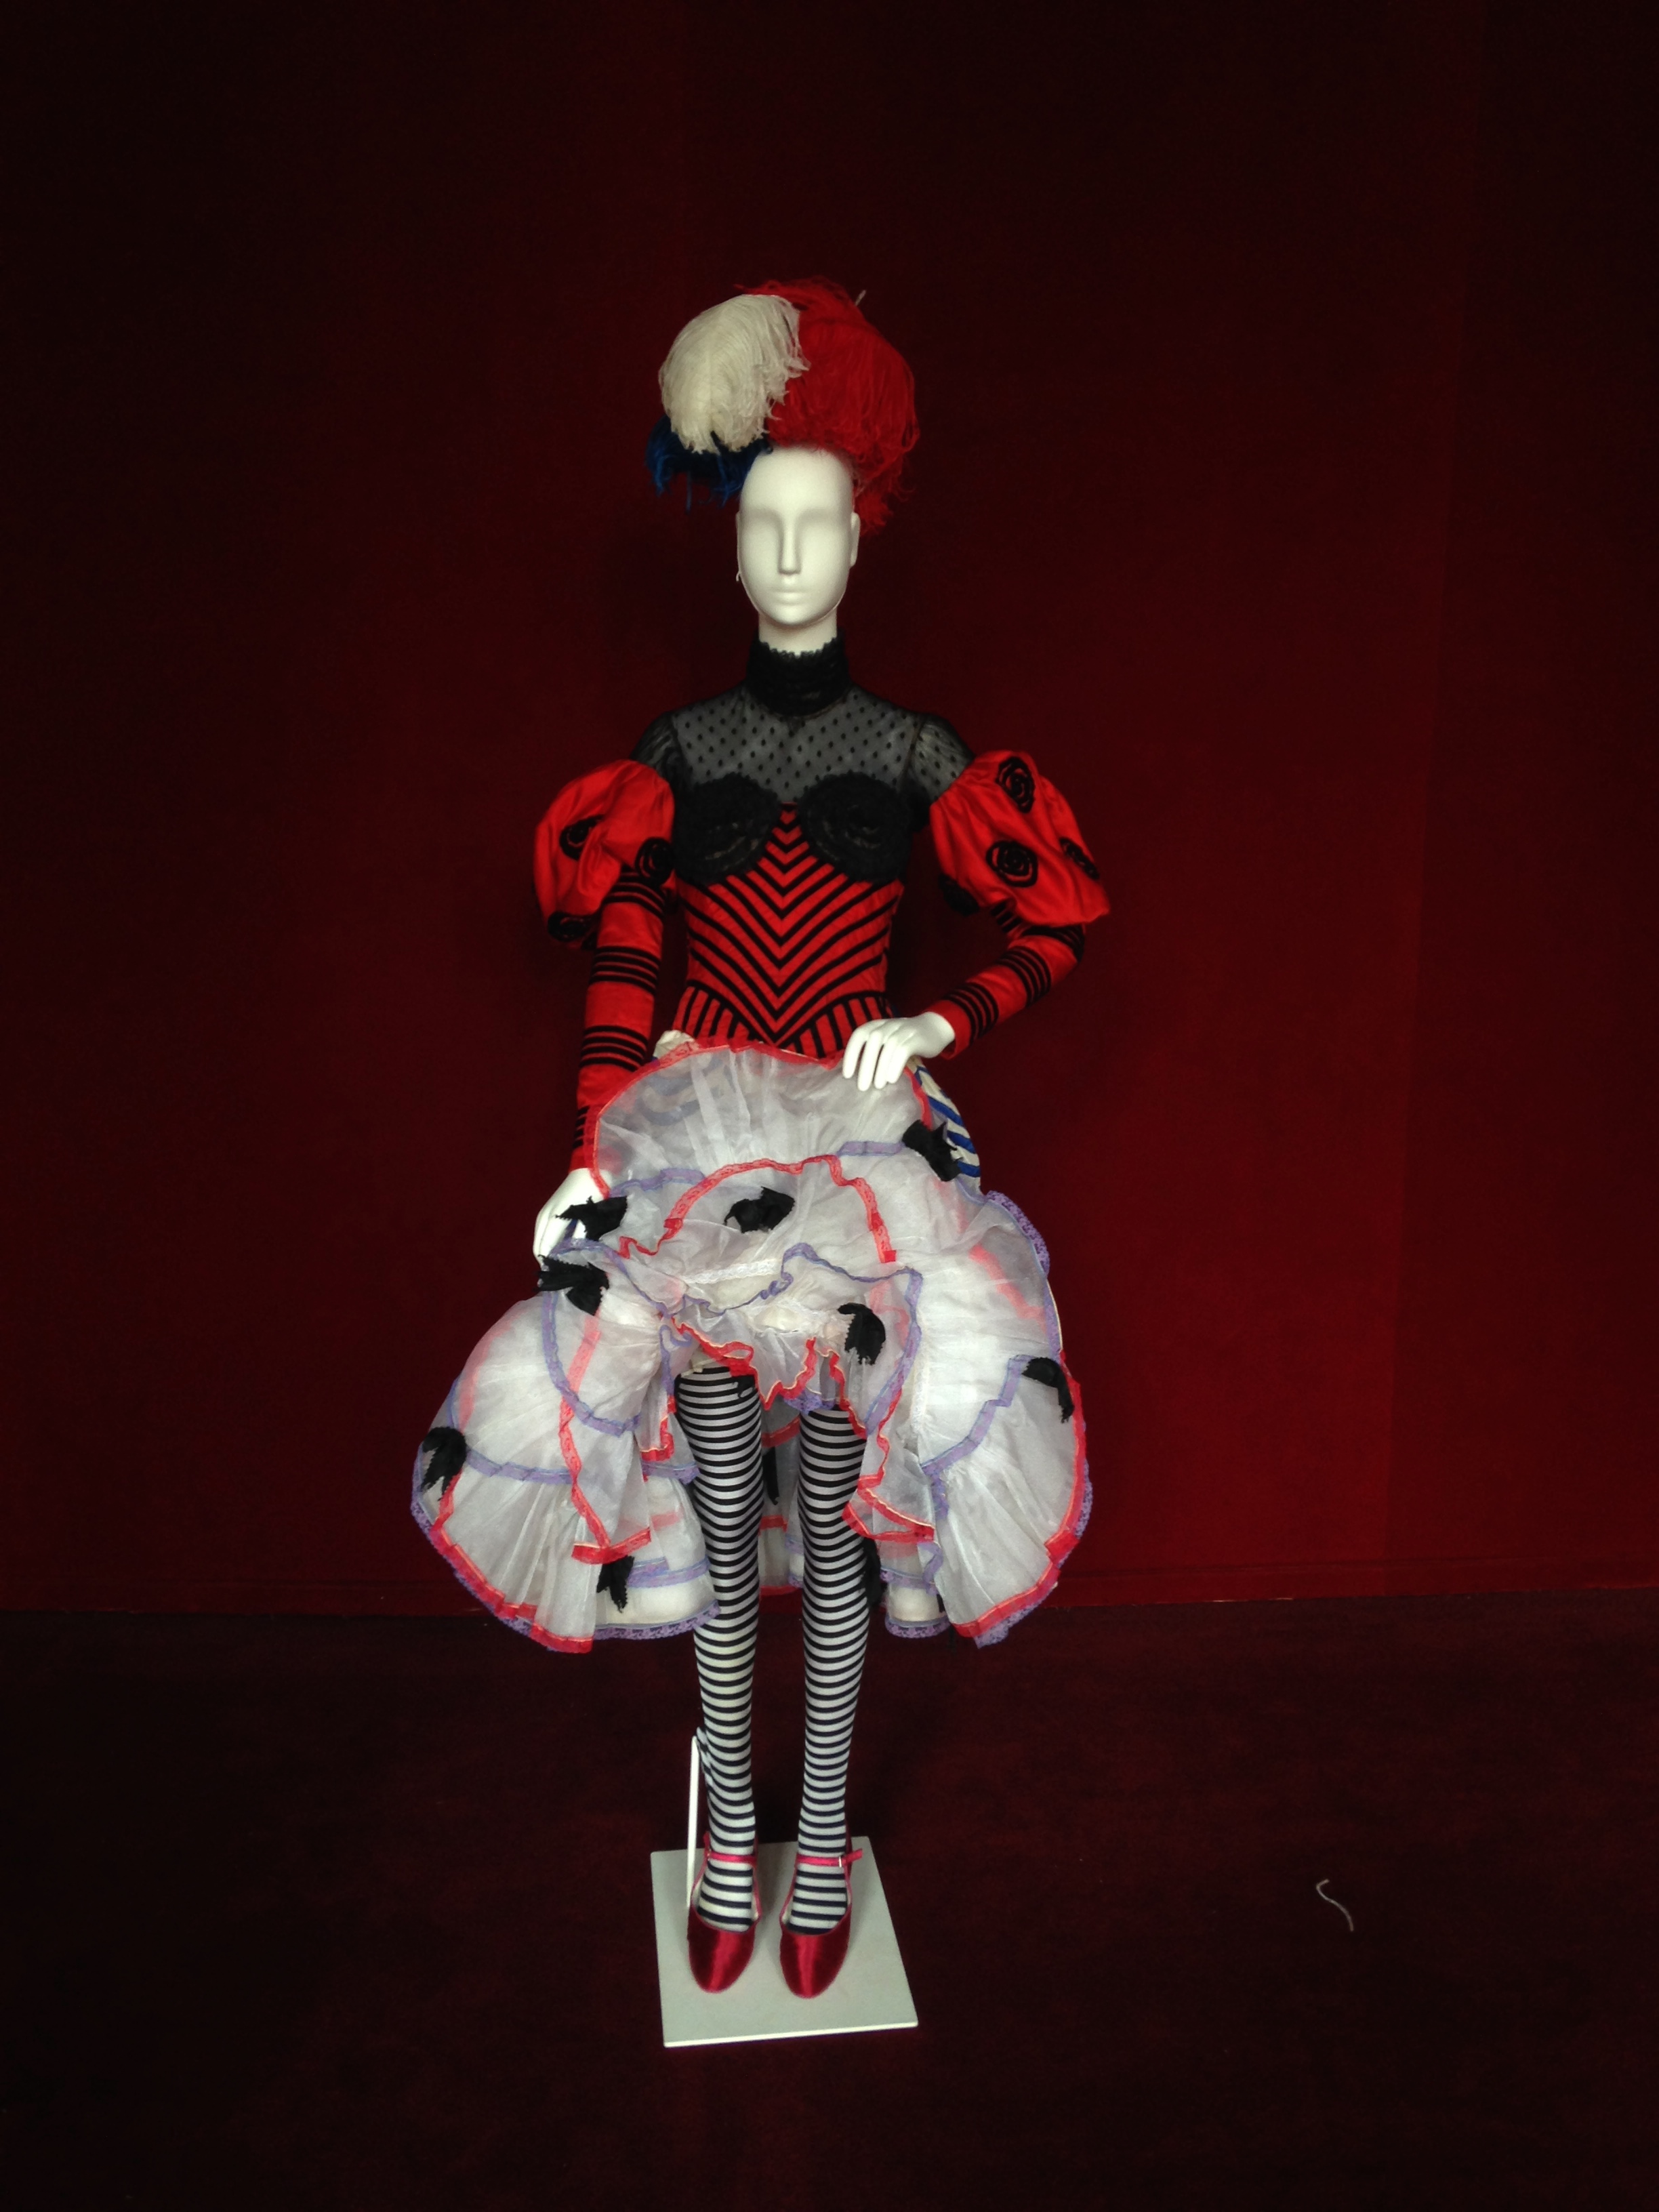 Ballet costume worn for the production 'Gaite Parisienne' dressed on a mannequin